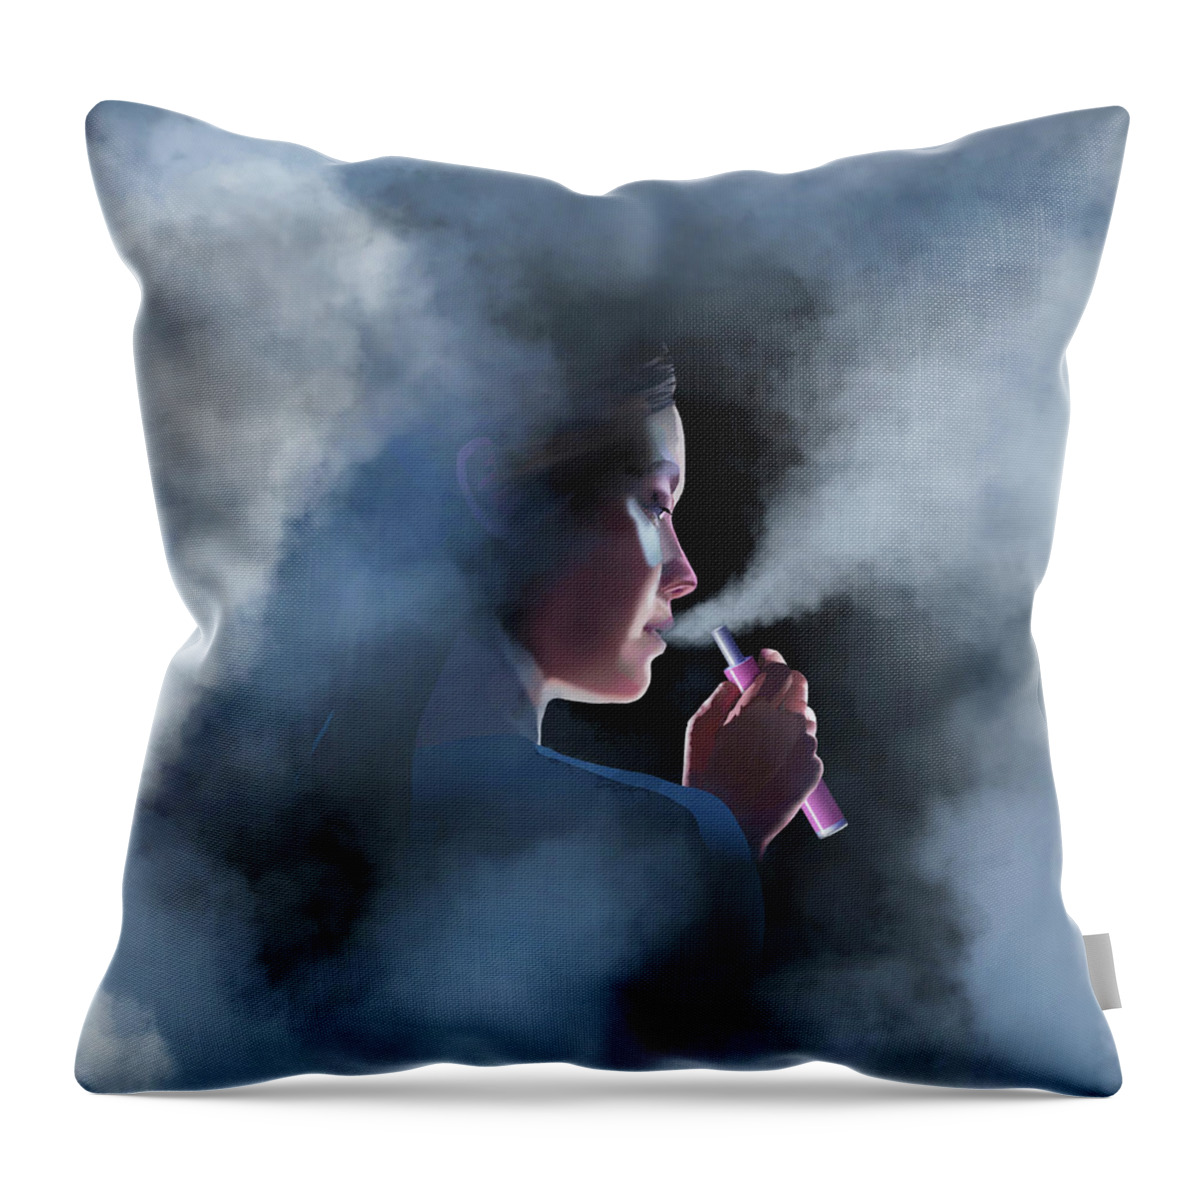 20-25 Years Throw Pillow featuring the photograph Woman Vaping by Ikon Images